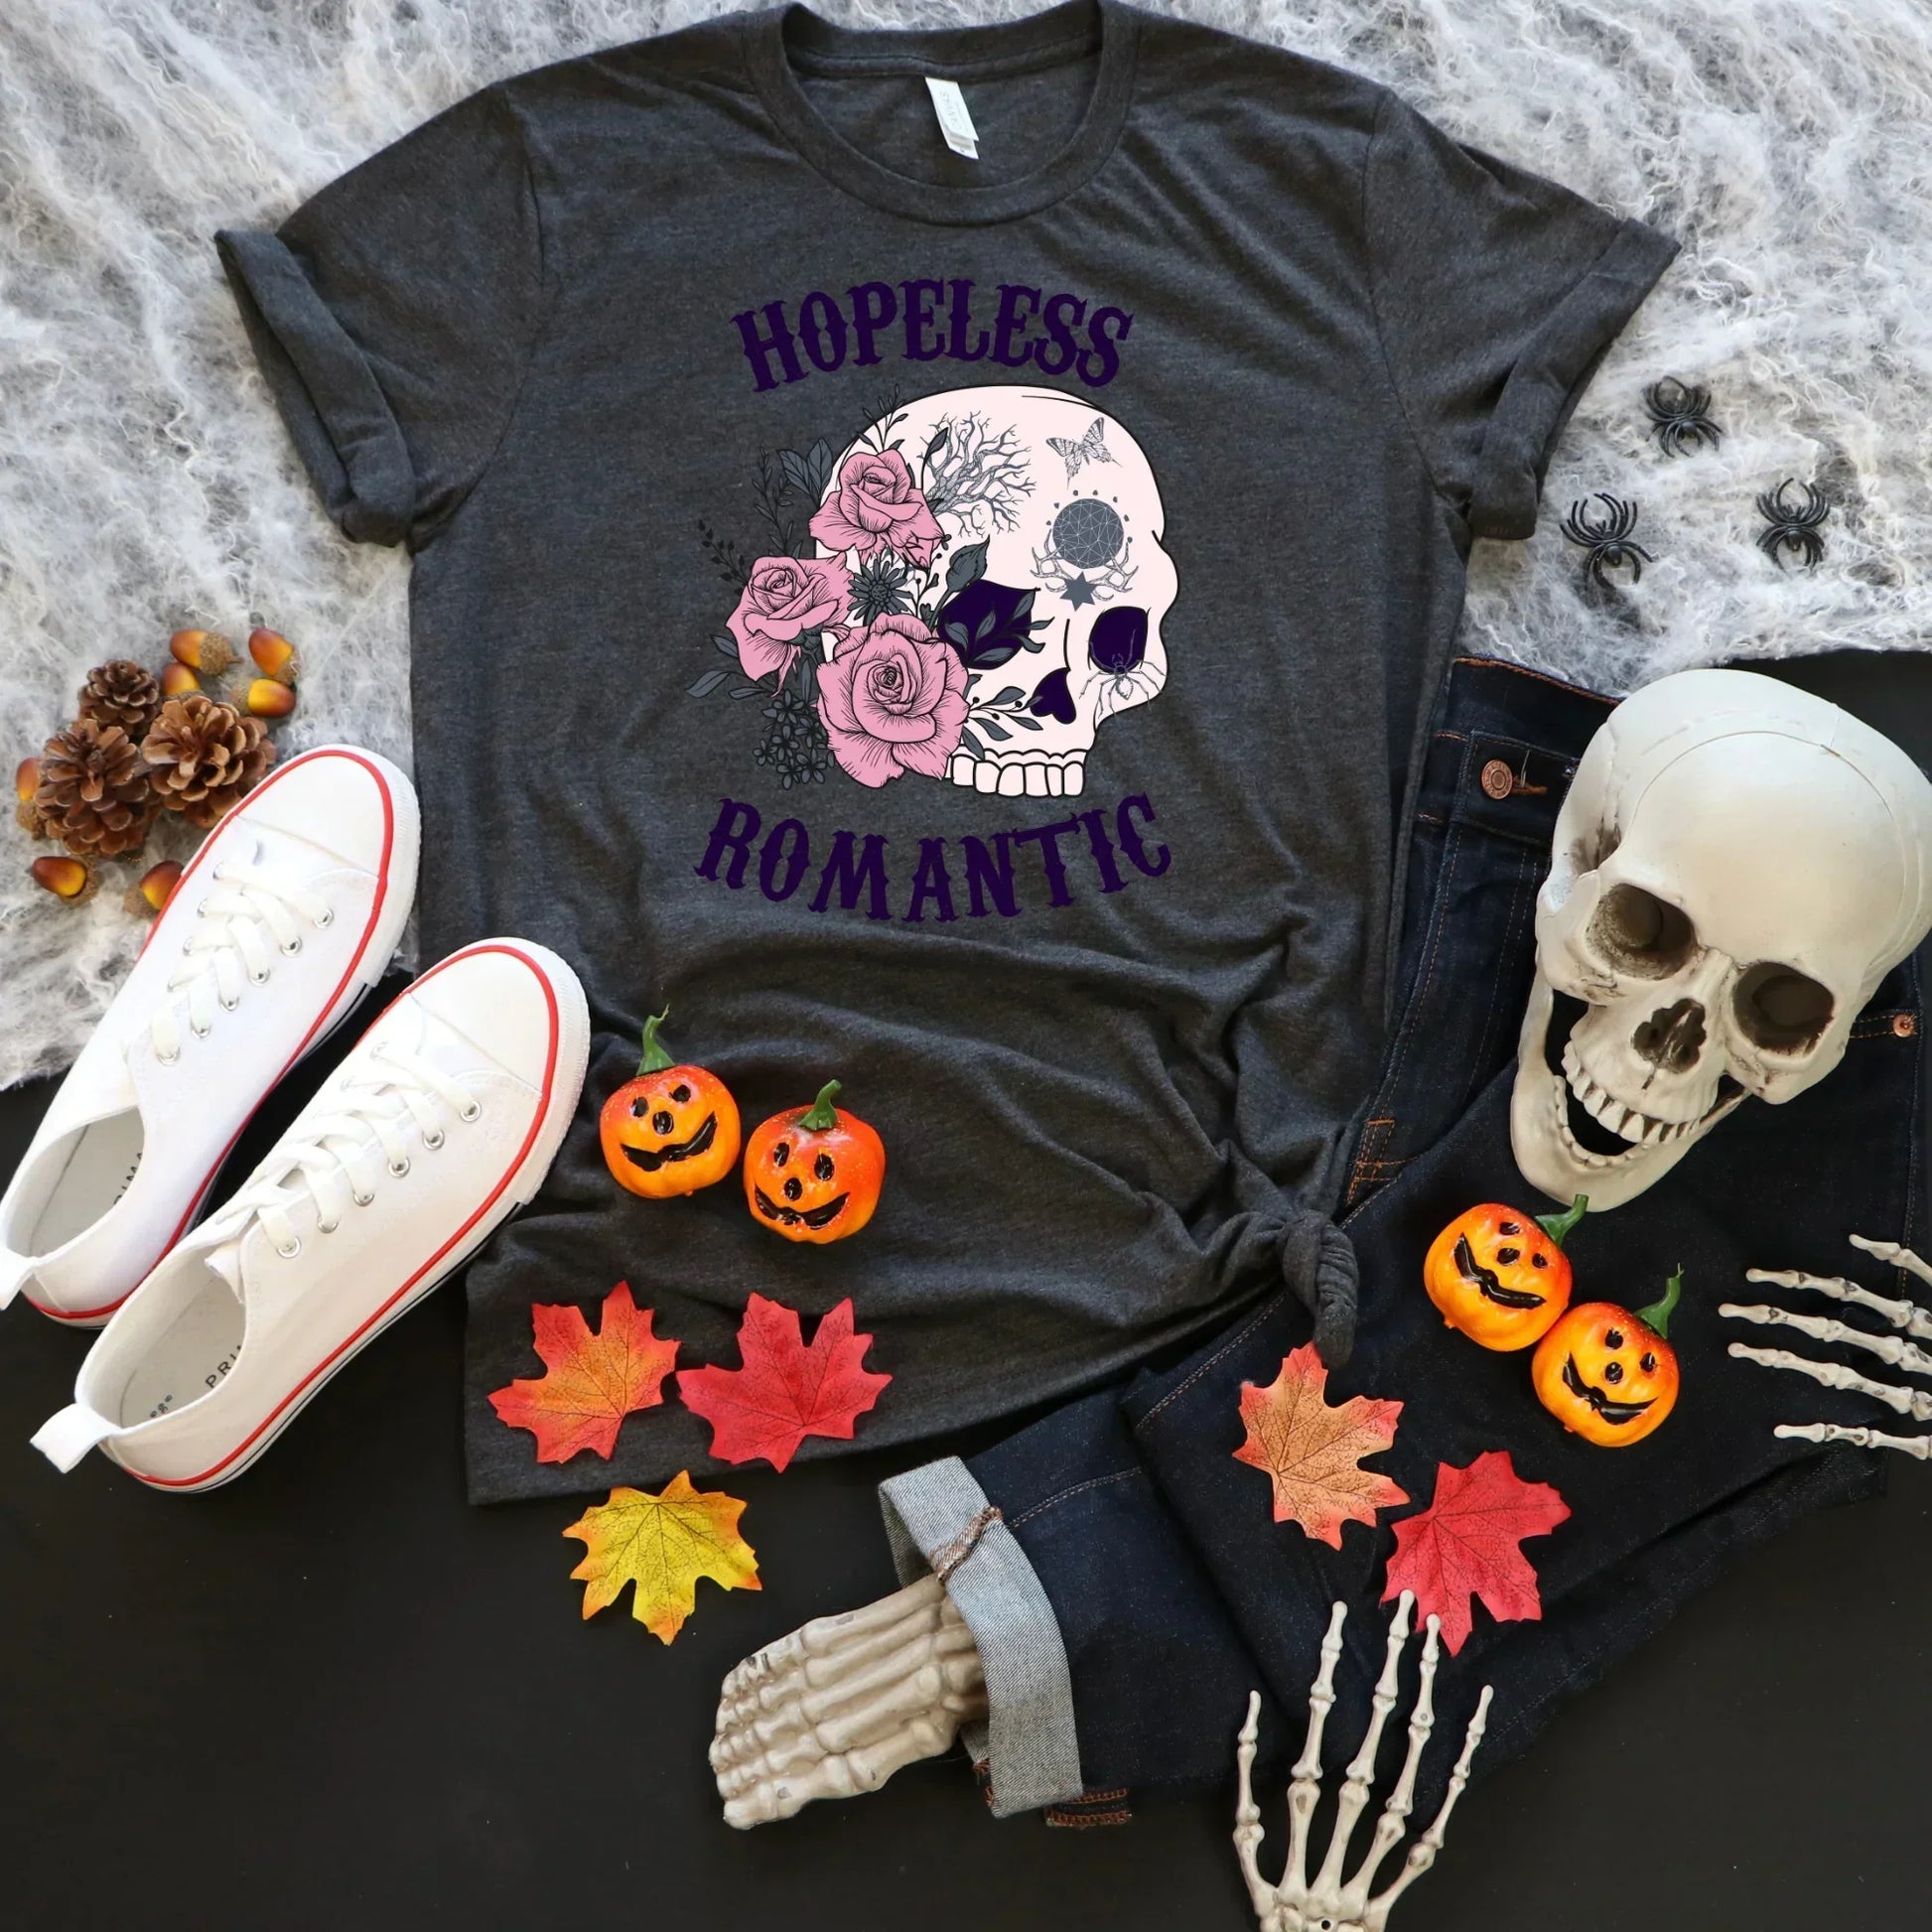 Hopeless Romantic Gothic Shirt, Halloween Sweatshirt, Witchy Vibes, Bats & Dead Roses Shirt, Moon Shirt, Magical Witch Shirt, Goth Style, Rot with Me, EMO Tee HMDesignStudioUS